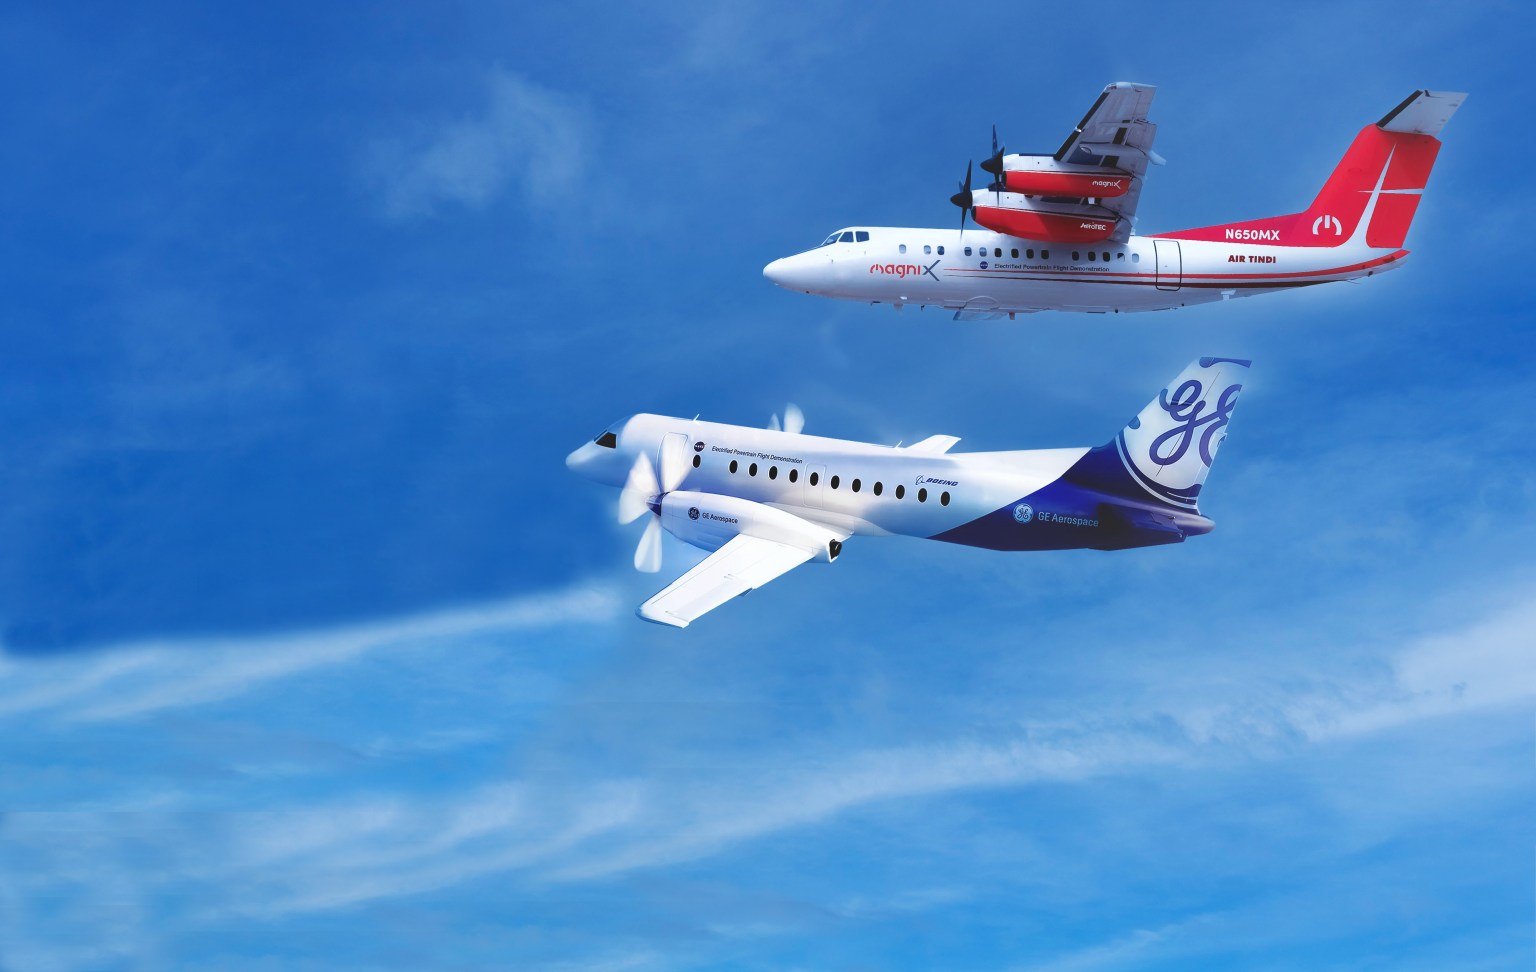 Artist illustration of the GE and magniX aircraft in flight in blue skies with white clouds.